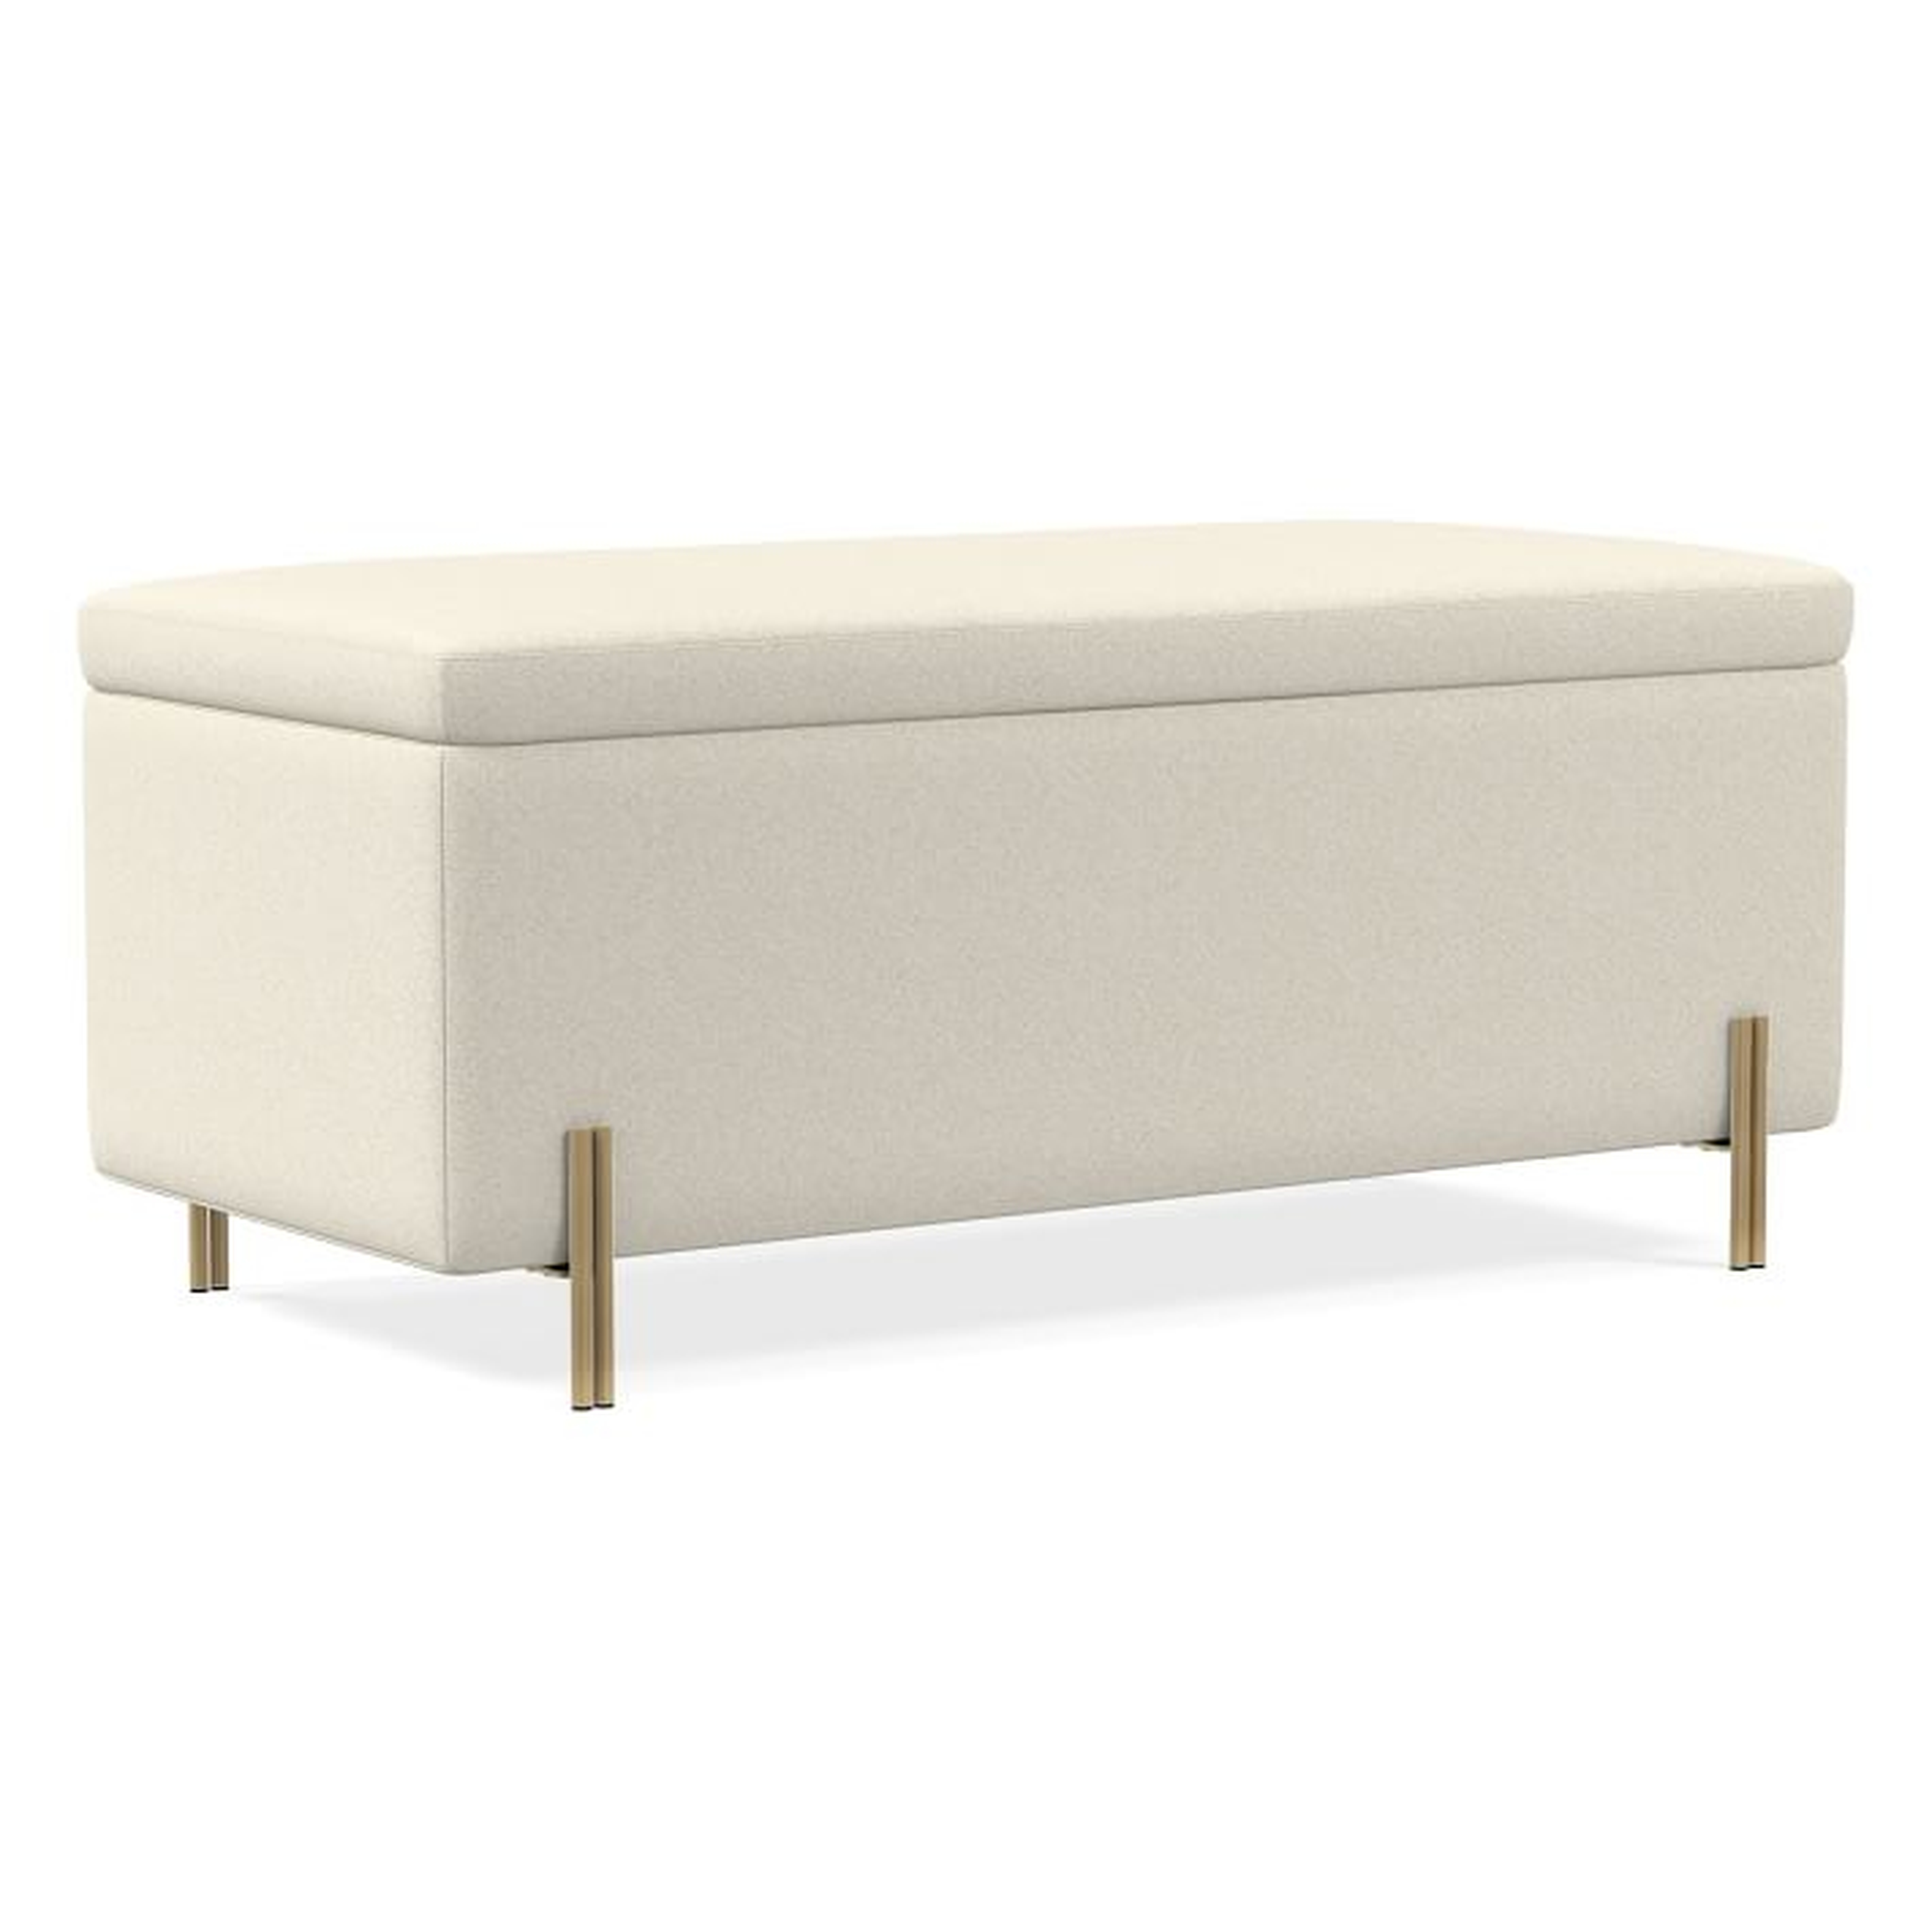 Mod Storage Bench 42", Luxe Boucle, Stone White, Antique Brass - West Elm